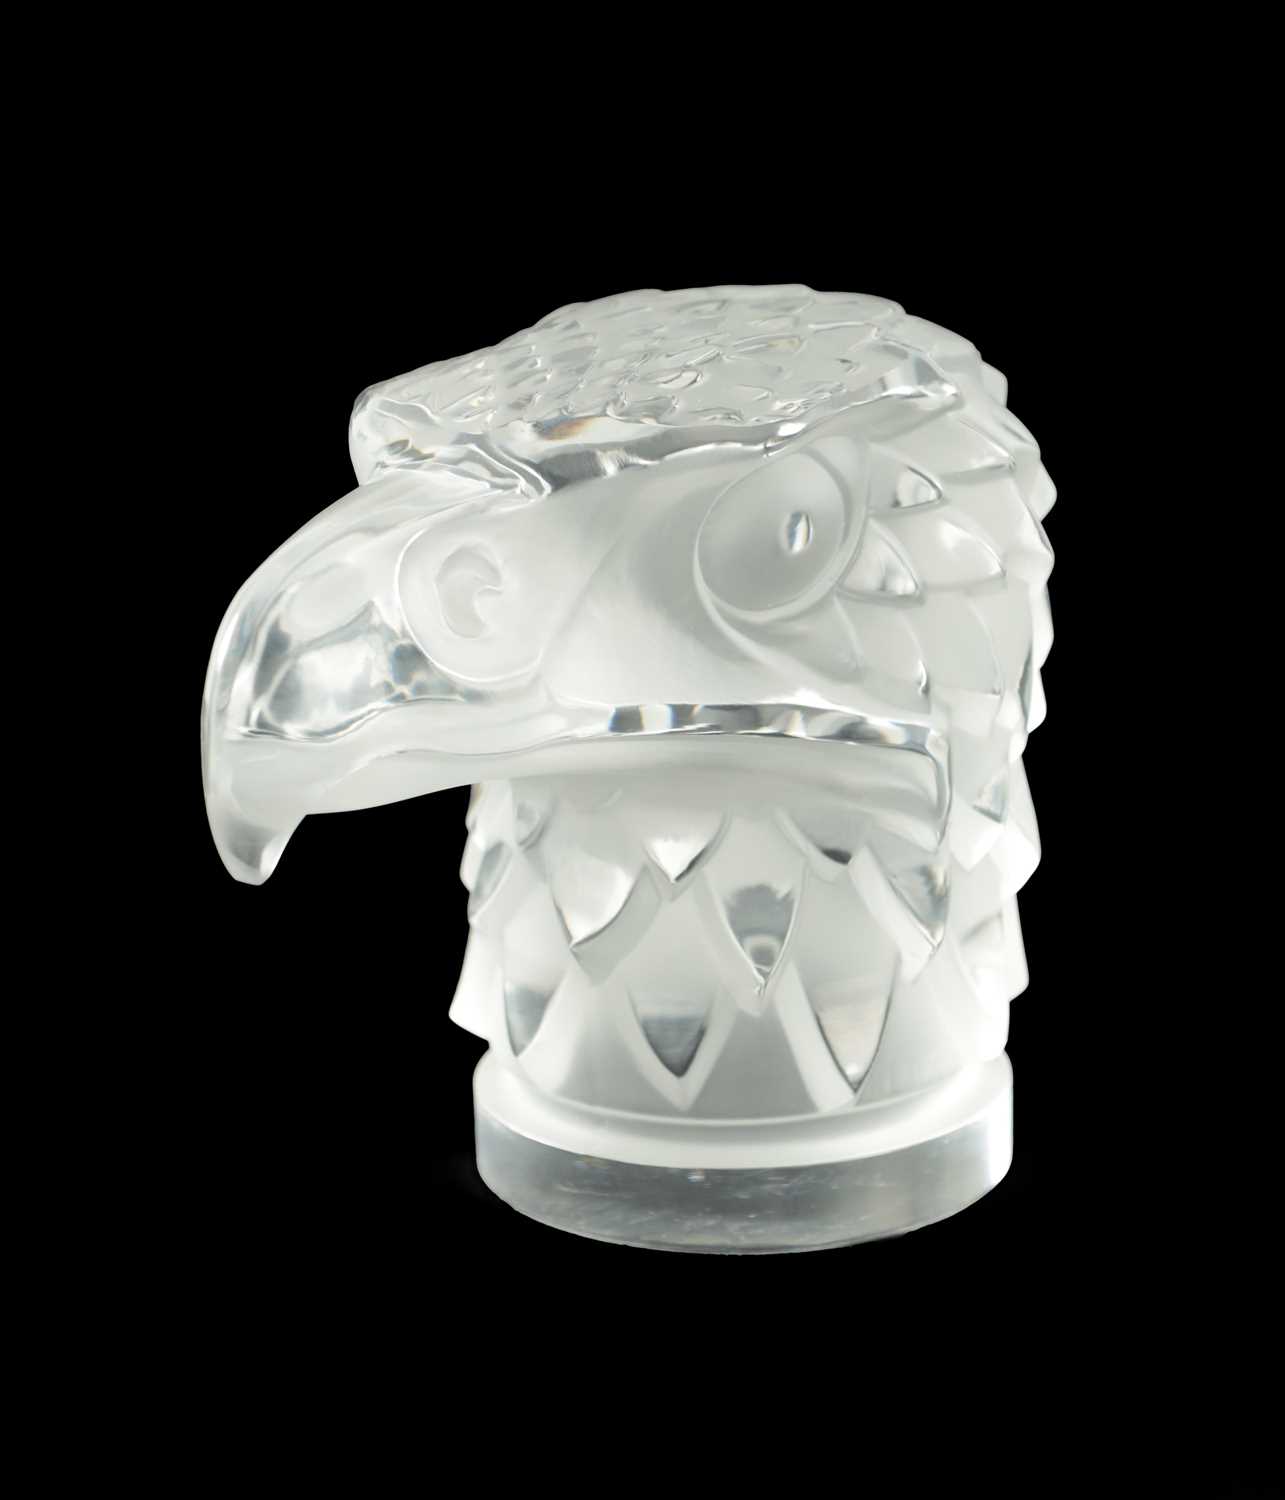 Lot 462 - A RENE LALIQUE 'TETE D'AIGLE' CLEAR AND FROSTED GLASS CAR MASCOT